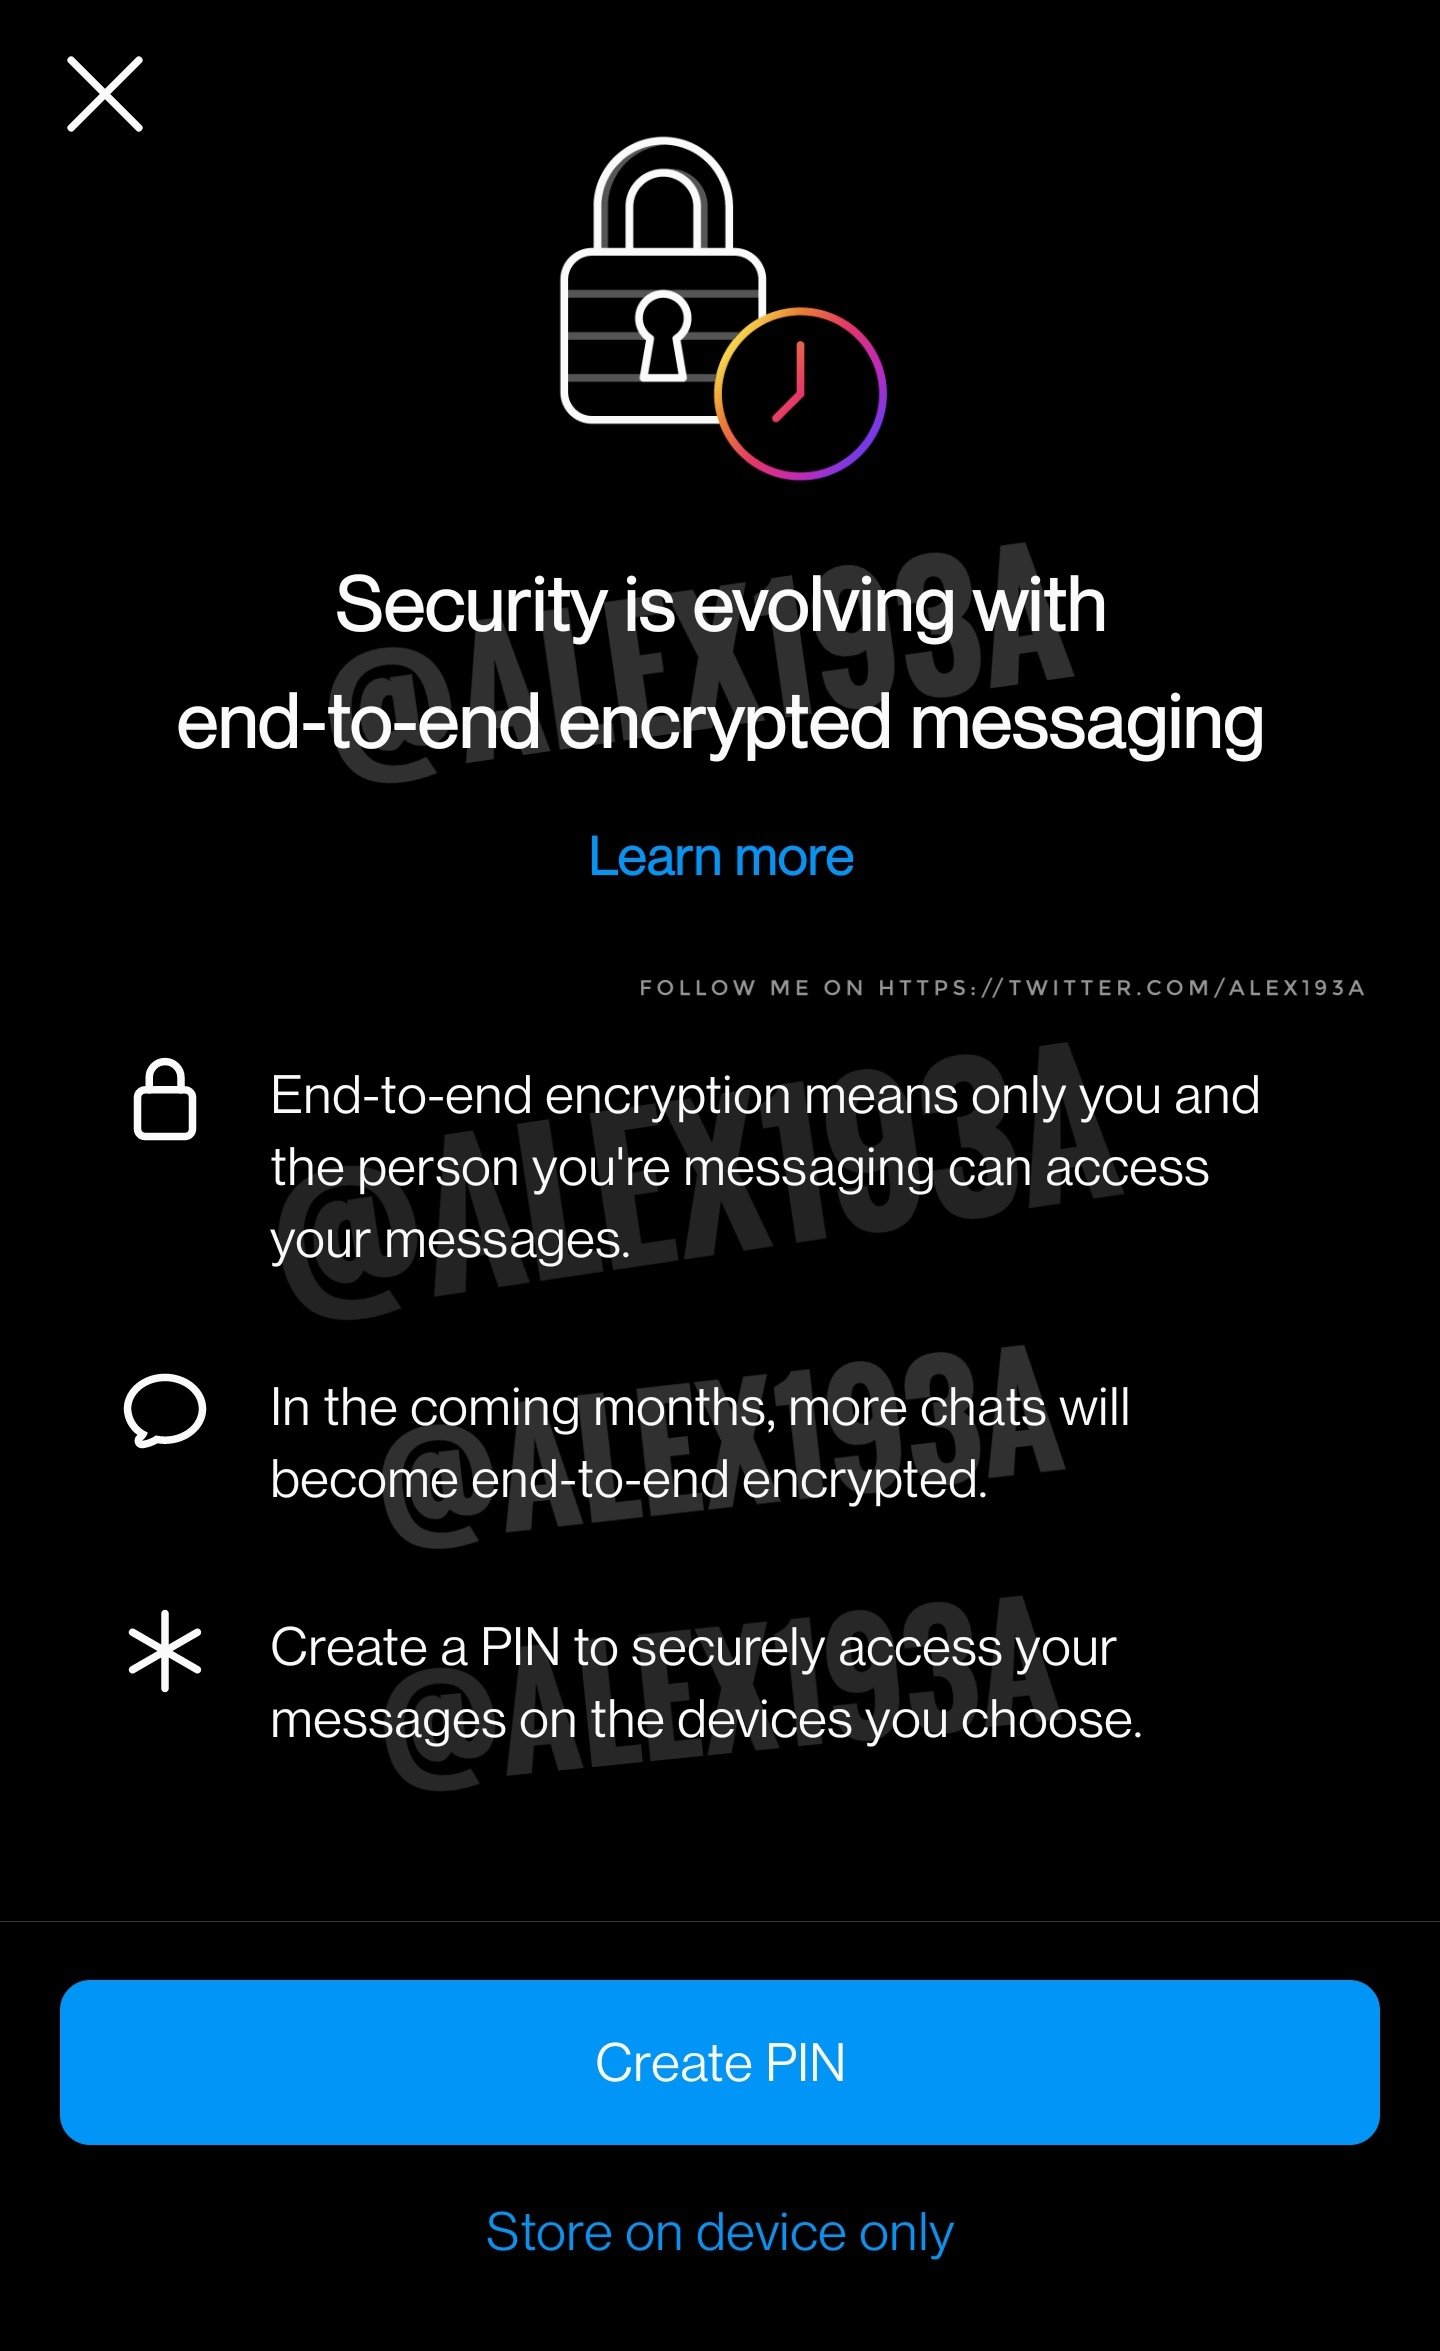 Alessandro Paluzzi on X: "#Instagram is working on the ability to create a  PIN to securely access your end-to-end encrypted messages on the devices  you choose 👀 https://t.co/ippRWuI9vQ" / X